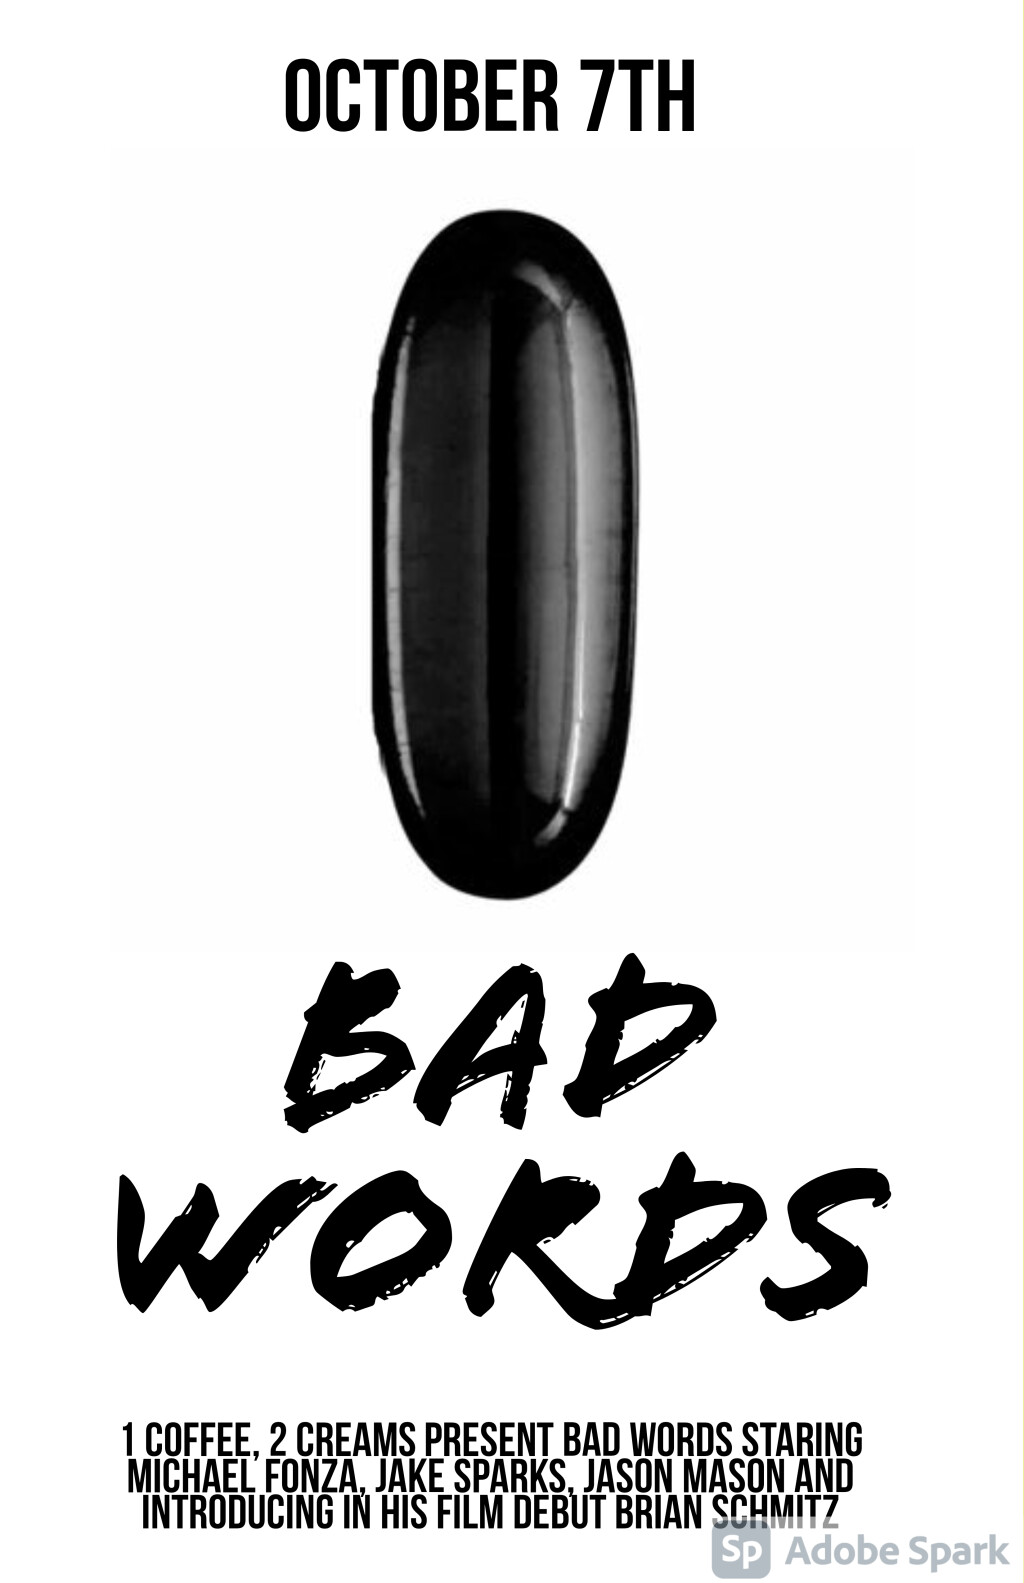 Filmposter for Bad Words